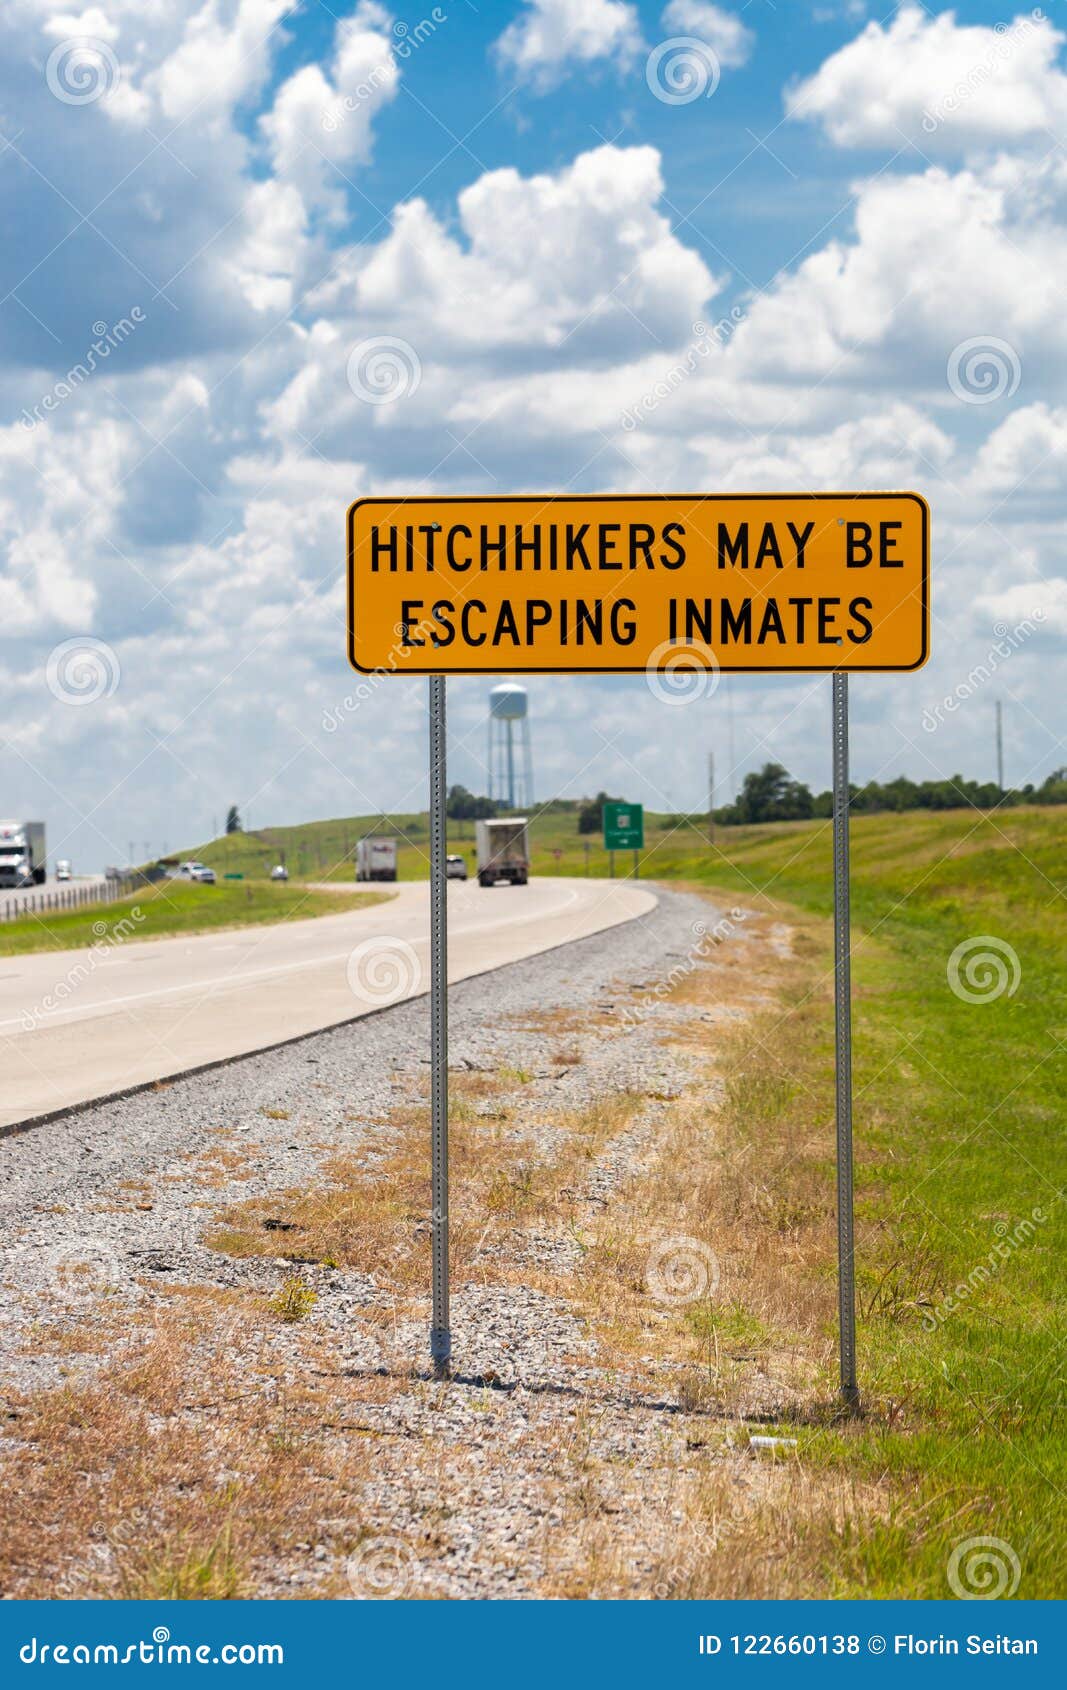 Highway Warning Sign about Hitchhikers that Might Escaping Inmates